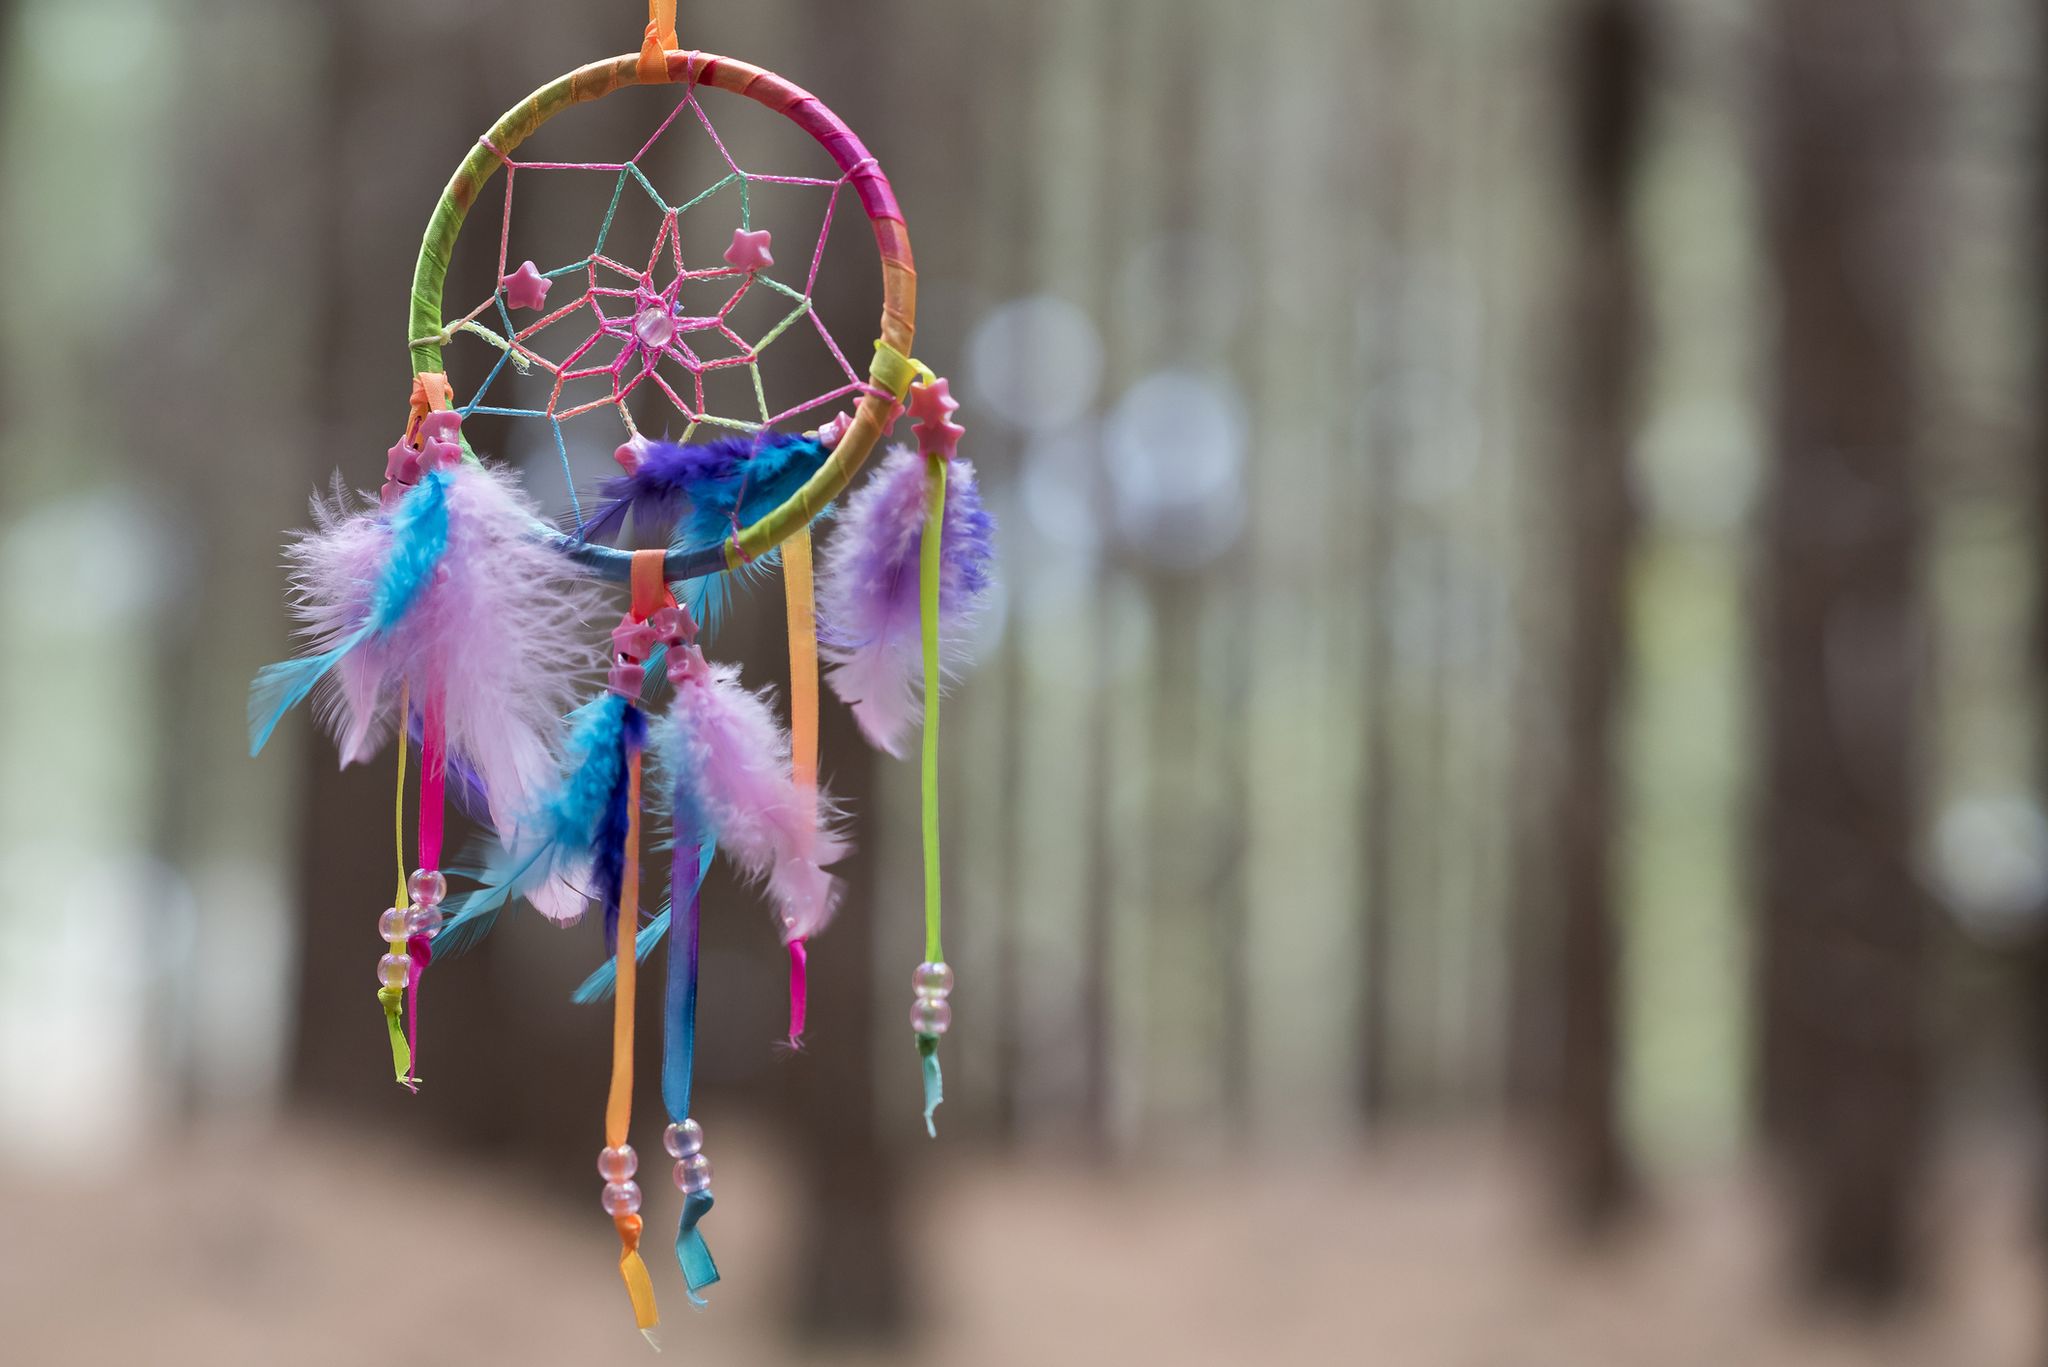 How to make a dreamcatcher with our step-by-step guide